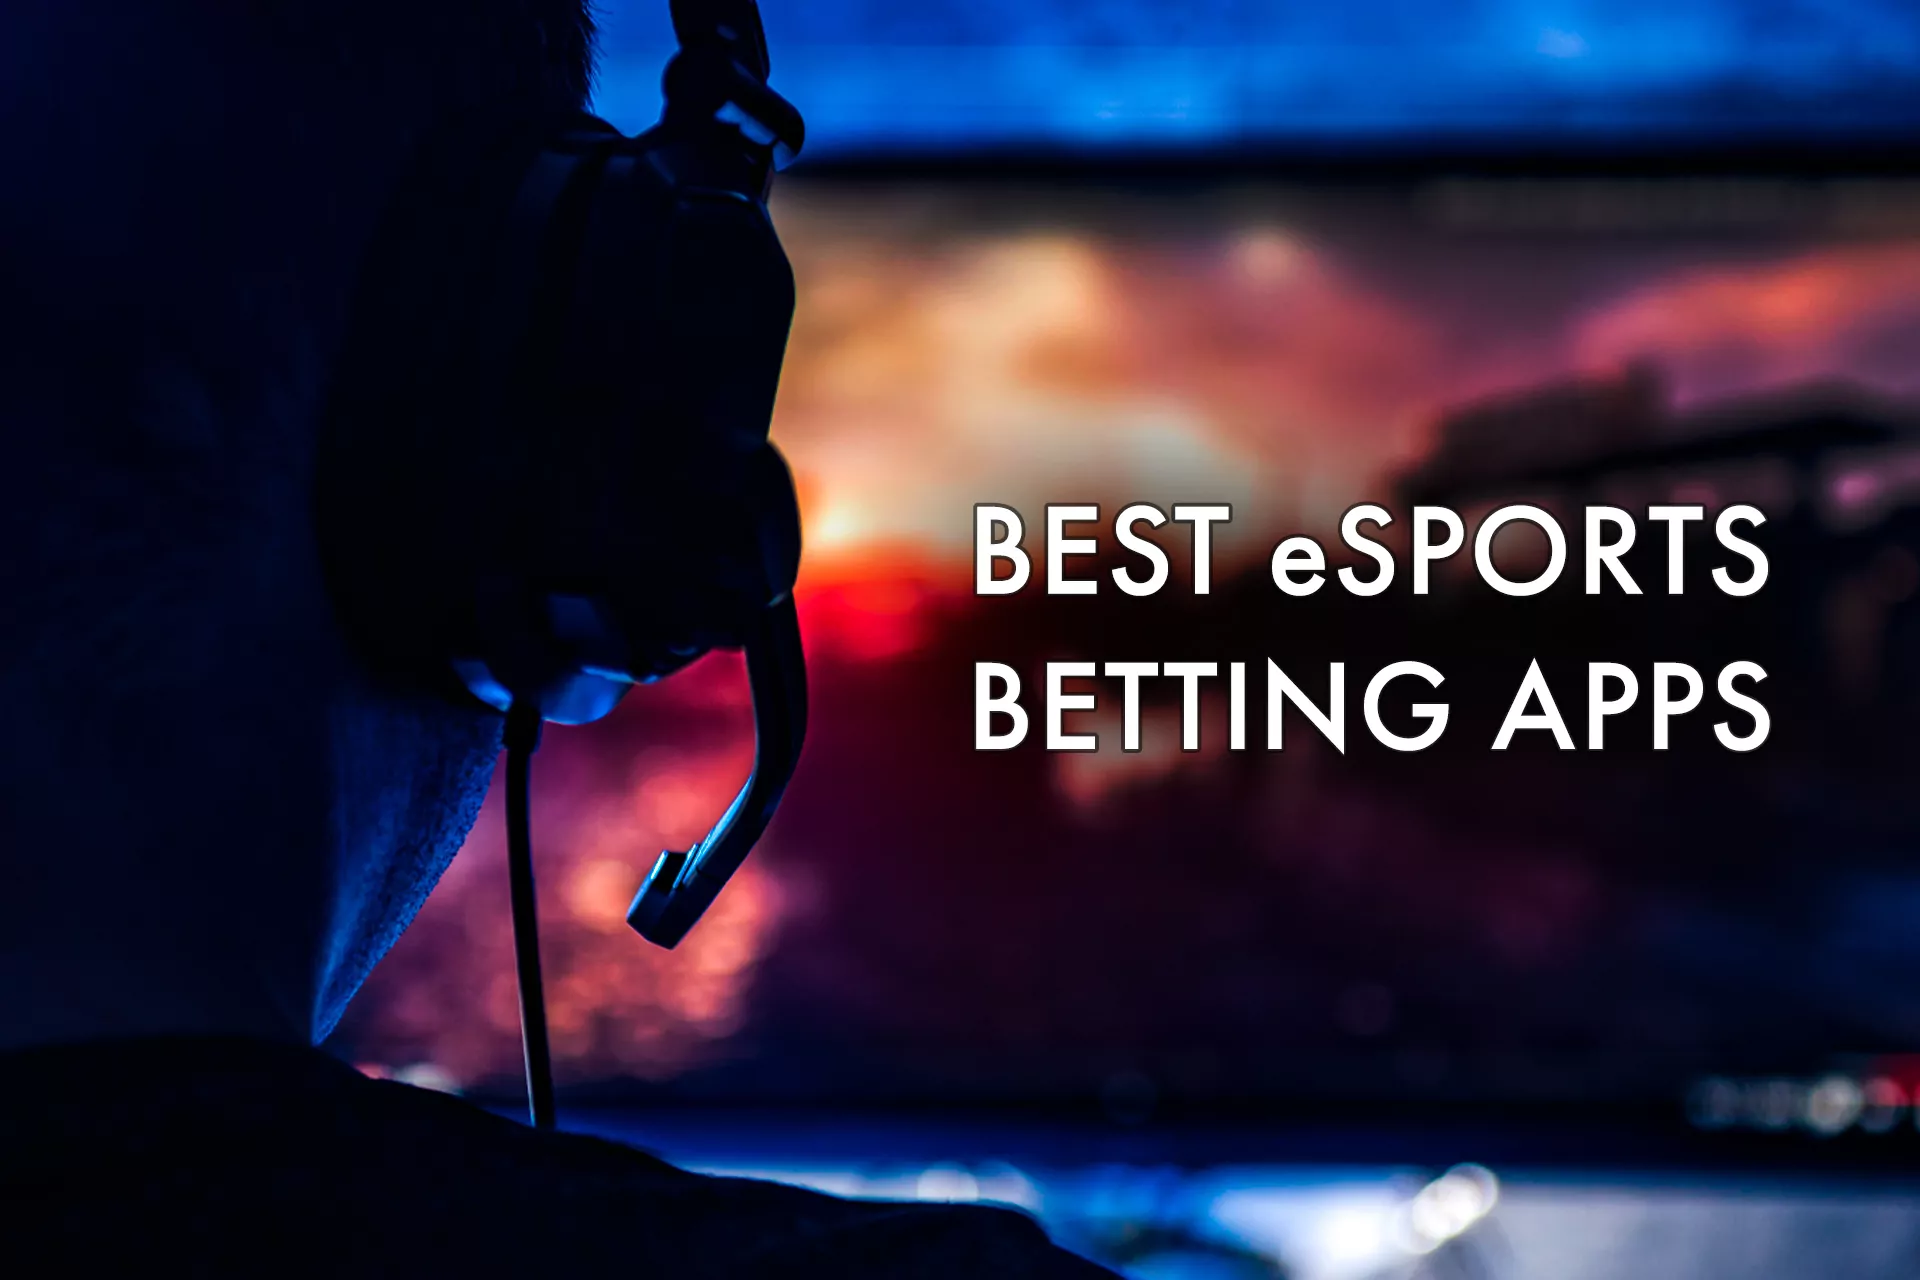 Install one of these apps to bet on the esports matches with the highest profit.